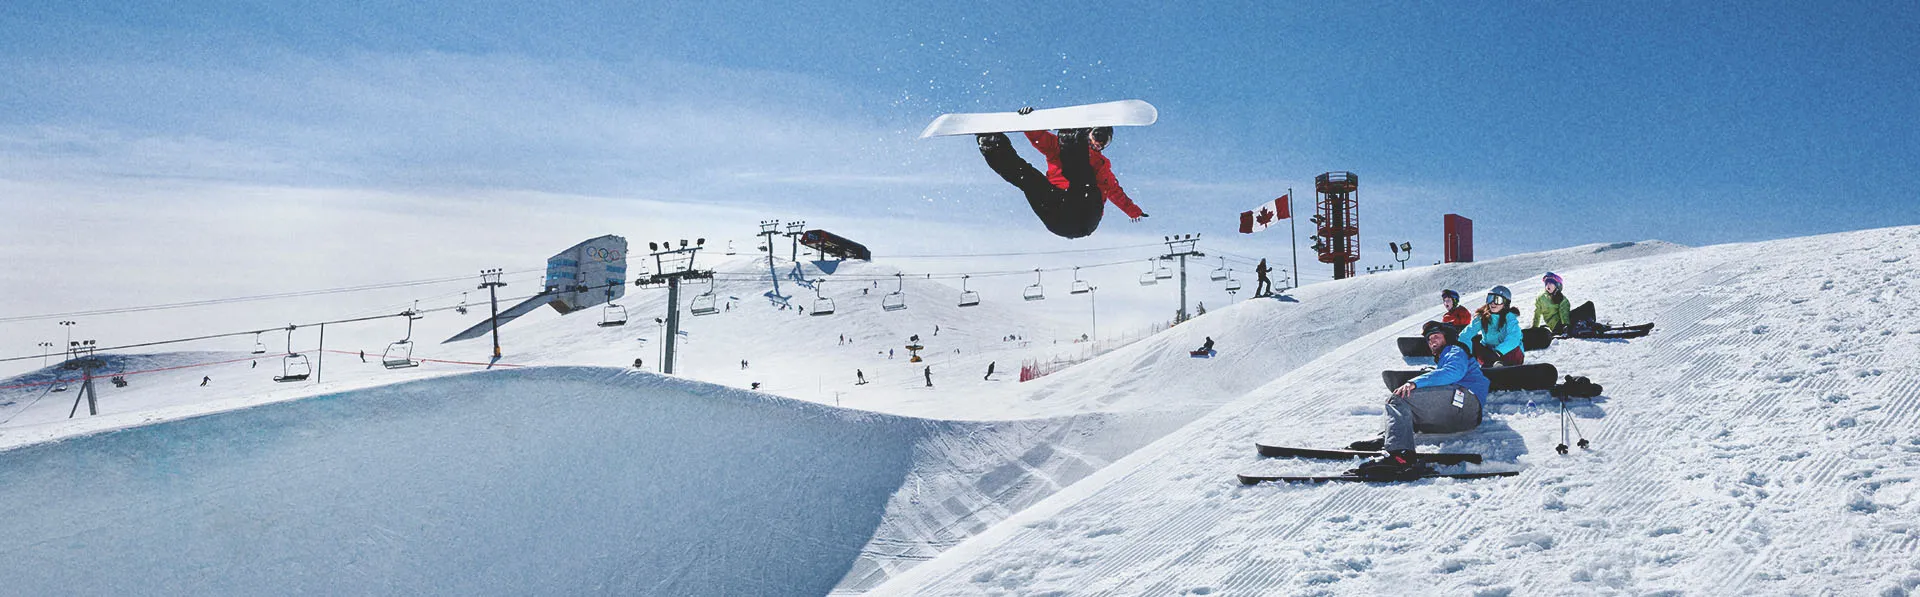 snowboarder jumping at WinSport ski hill in Calgary